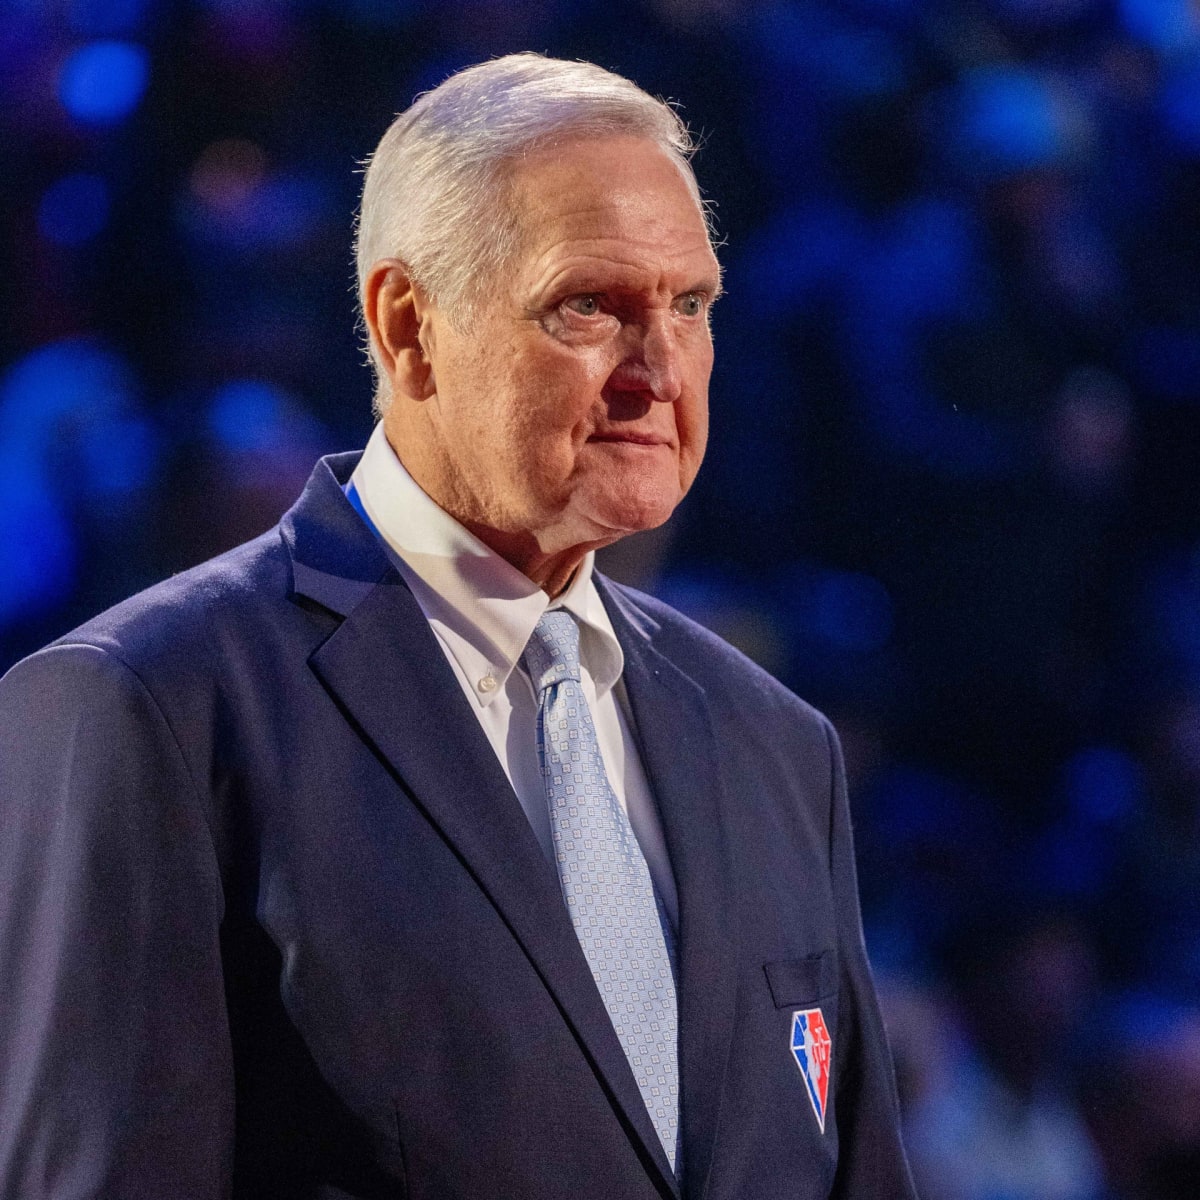 HBO's Winning Time: Jerry West player bio